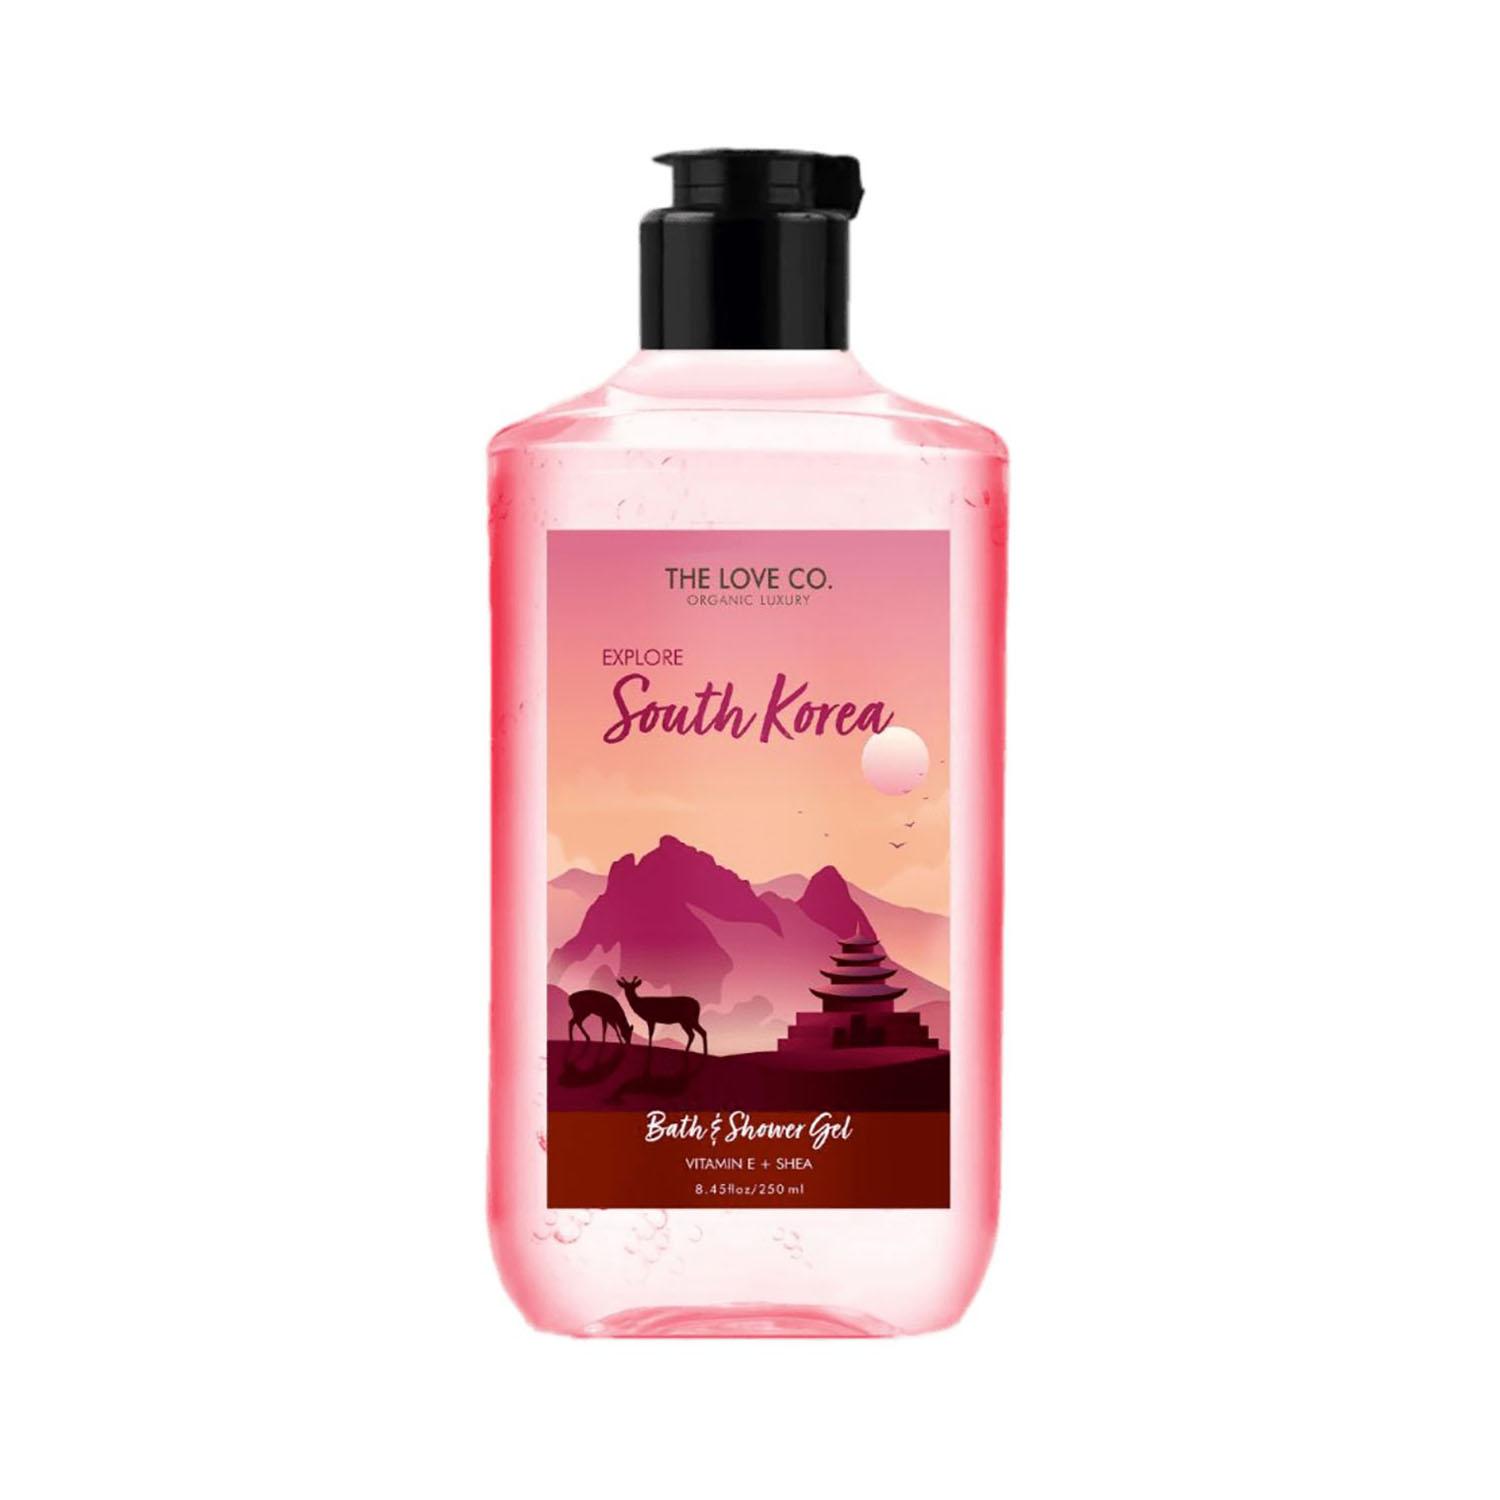 THE LOVE CO. South Korea Body and Shower Gel (250ml)